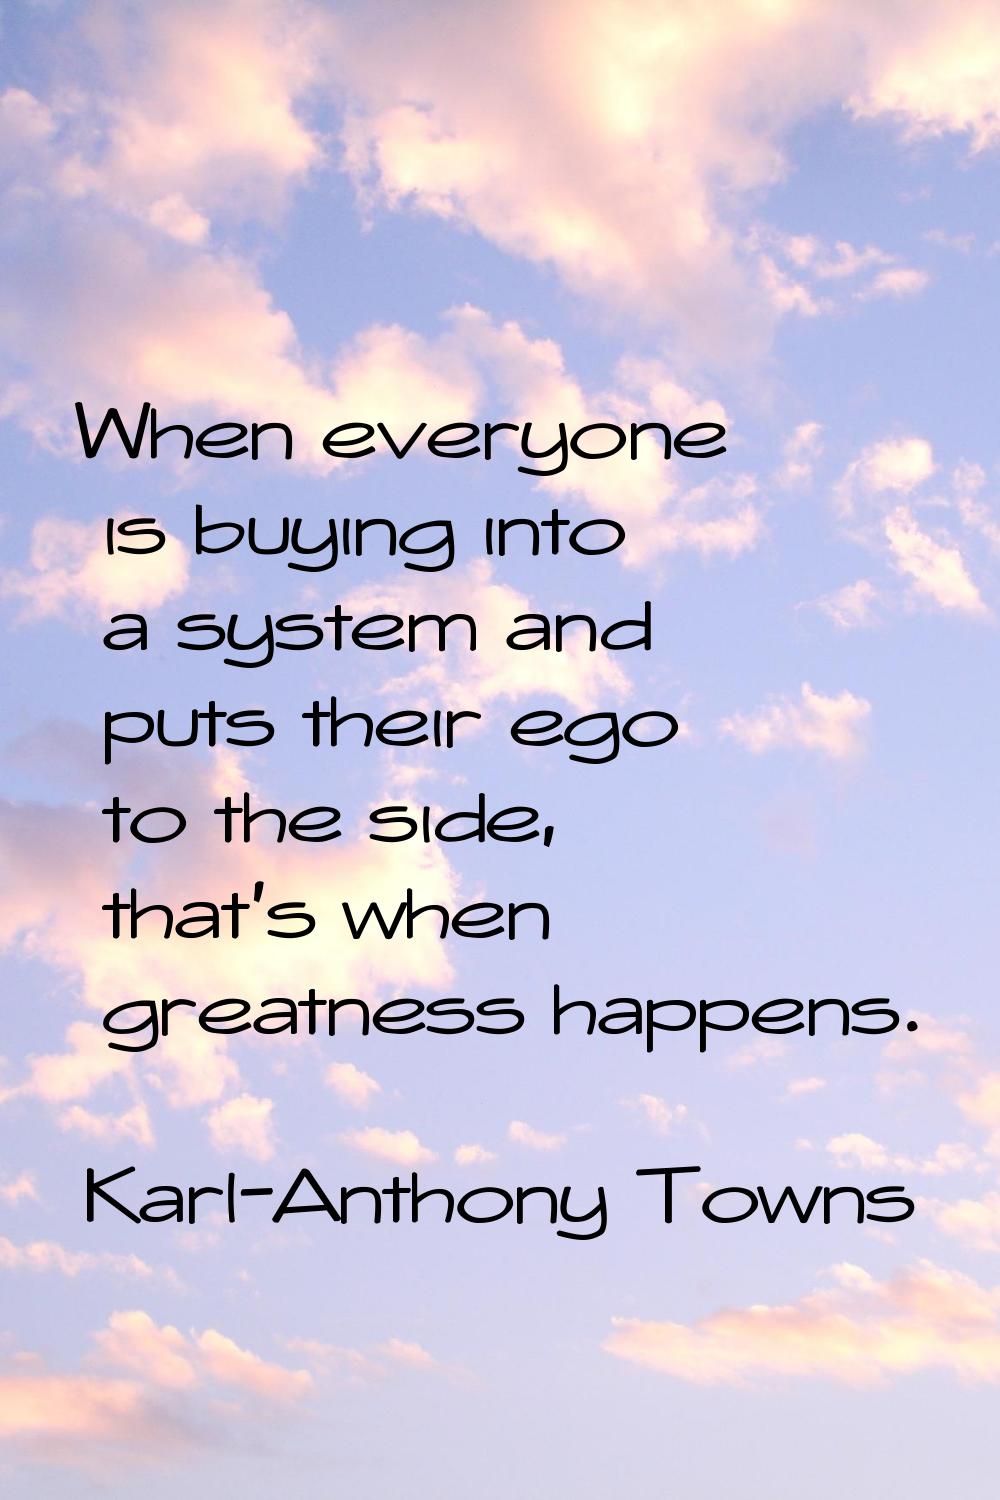 When everyone is buying into a system and puts their ego to the side, that's when greatness happens